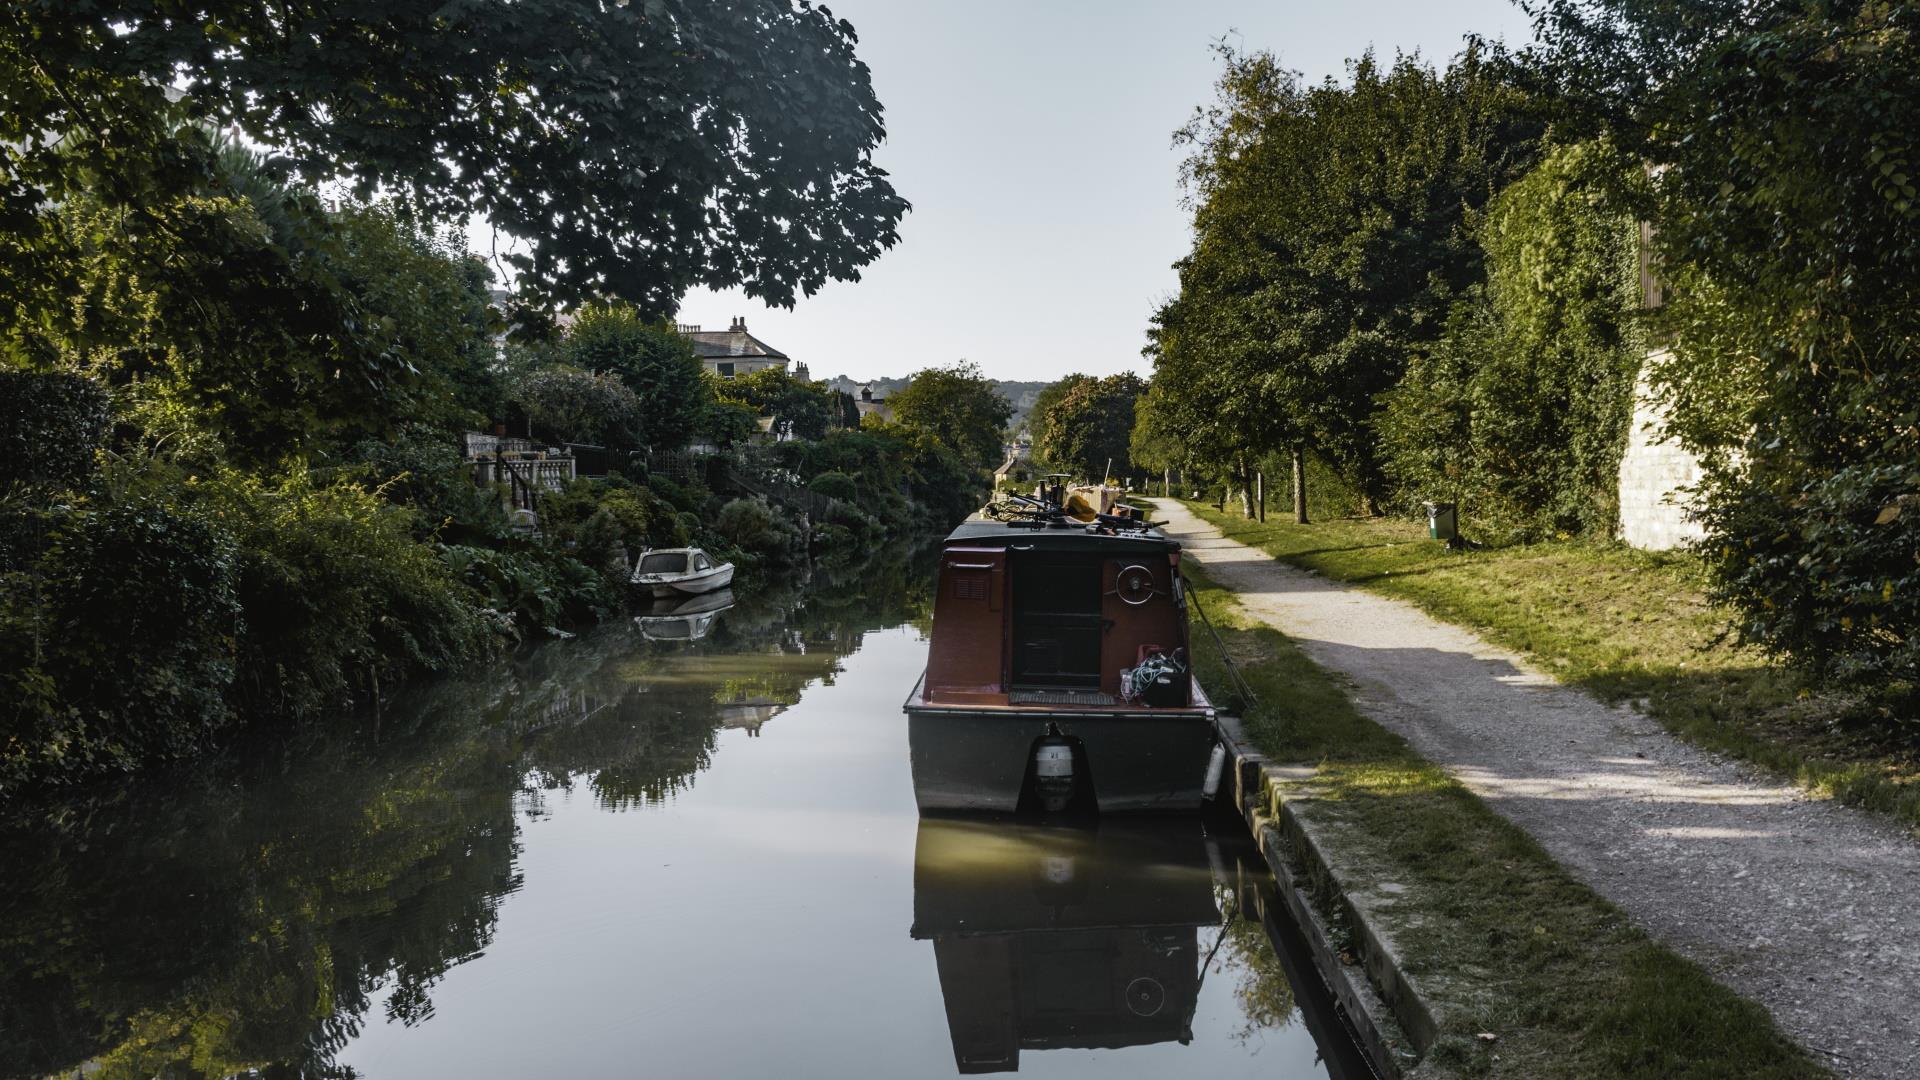 Canal with trees overhanging, a canal boat and tow path adjacent